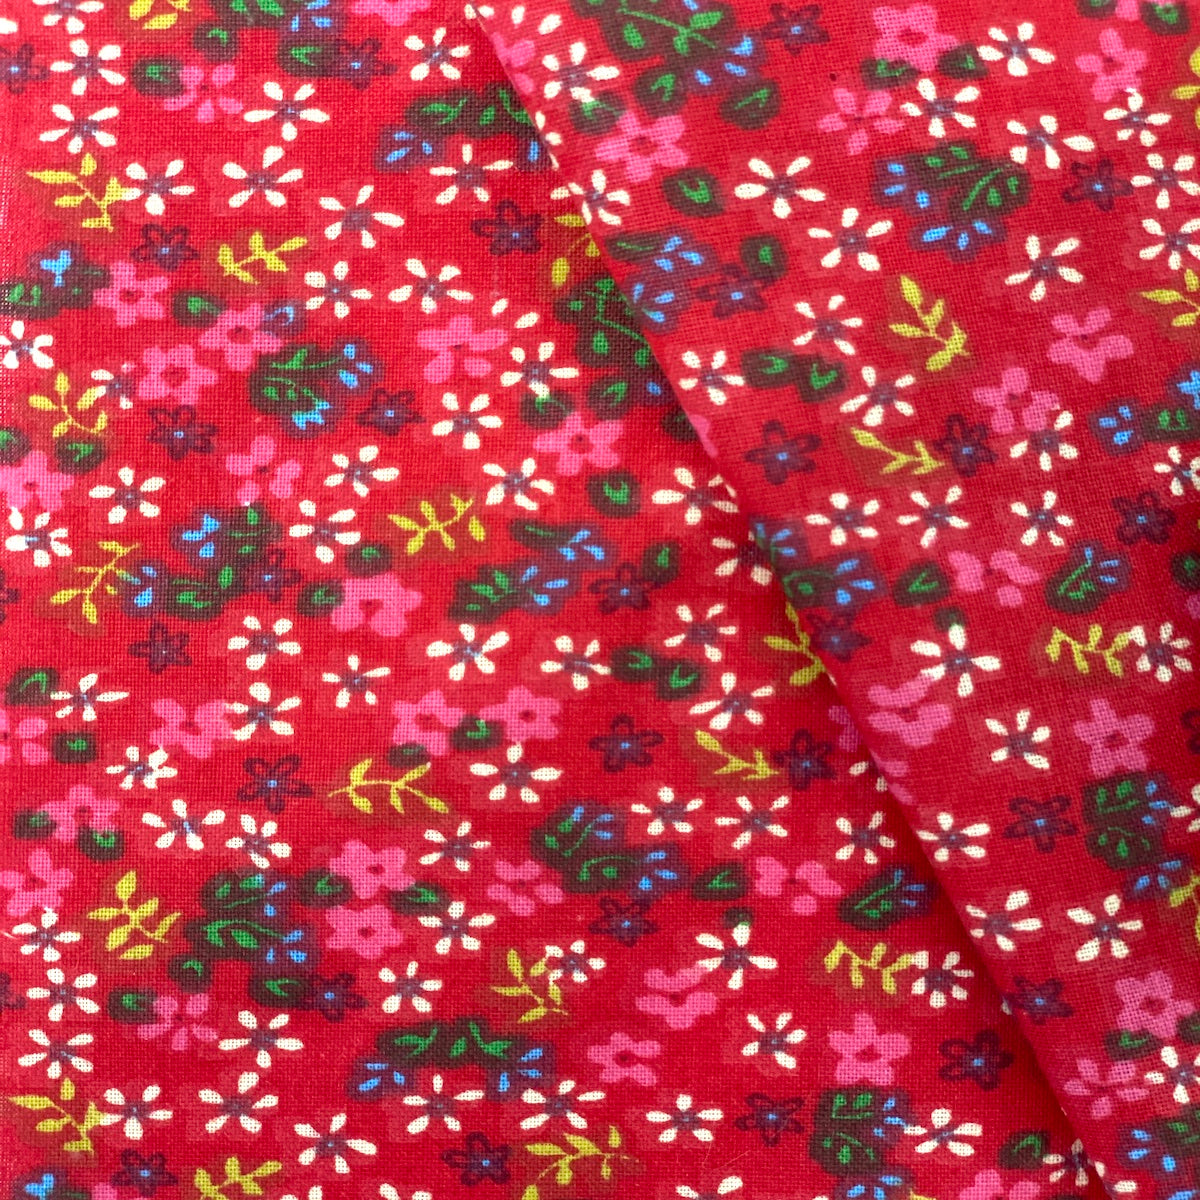 POLYCOTTON FABRIC – DRESS FABRIC – WHOLESALE AVAILABLE